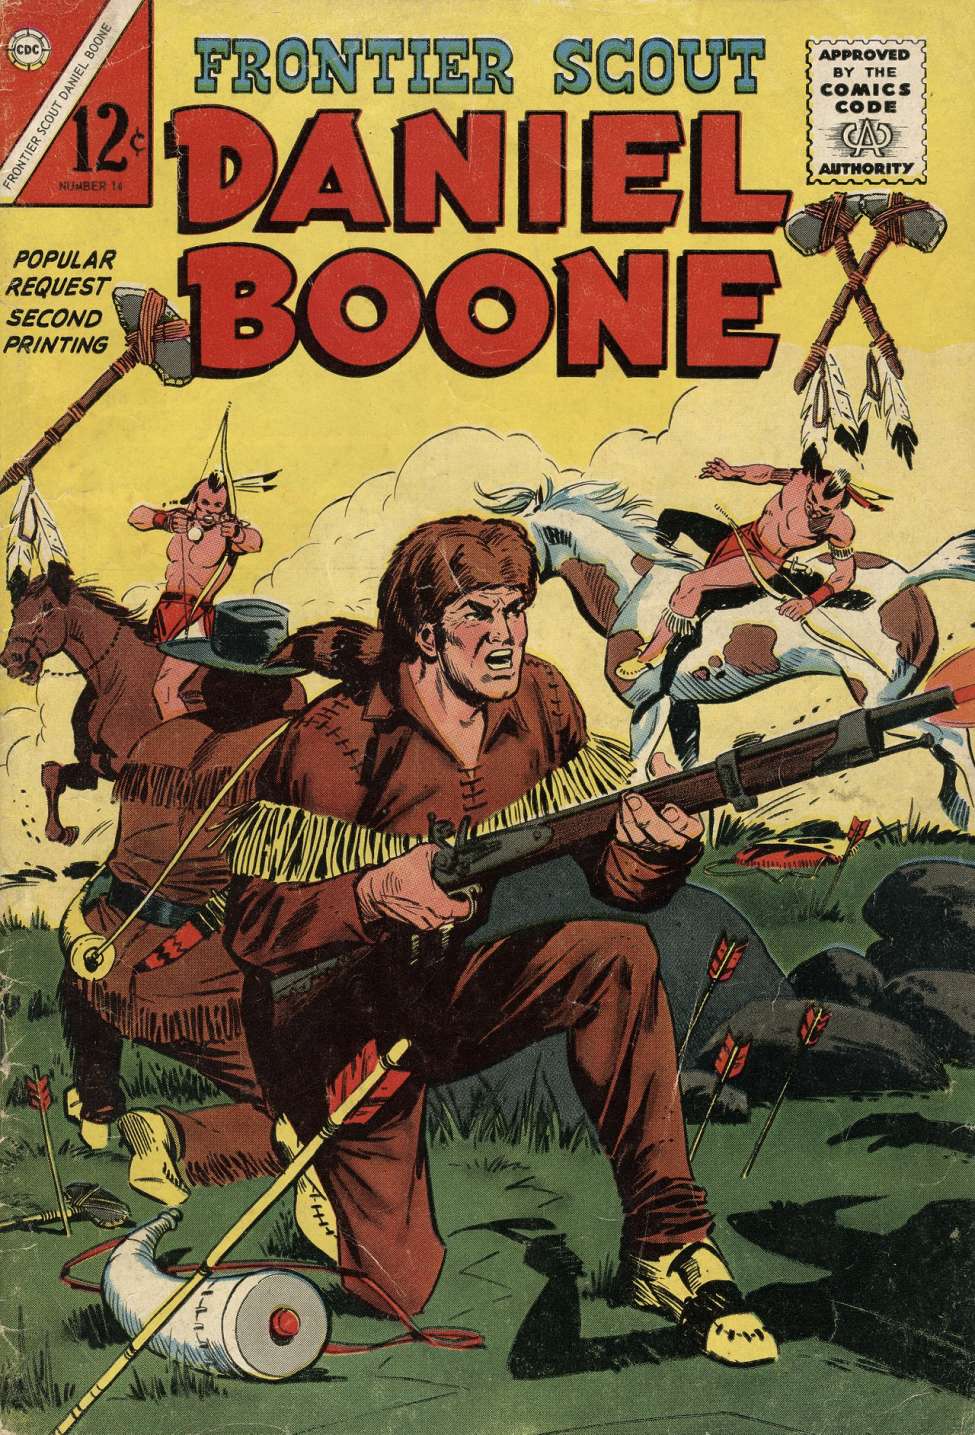 Book Cover For Frontier Scout, Dan'l Boone 14